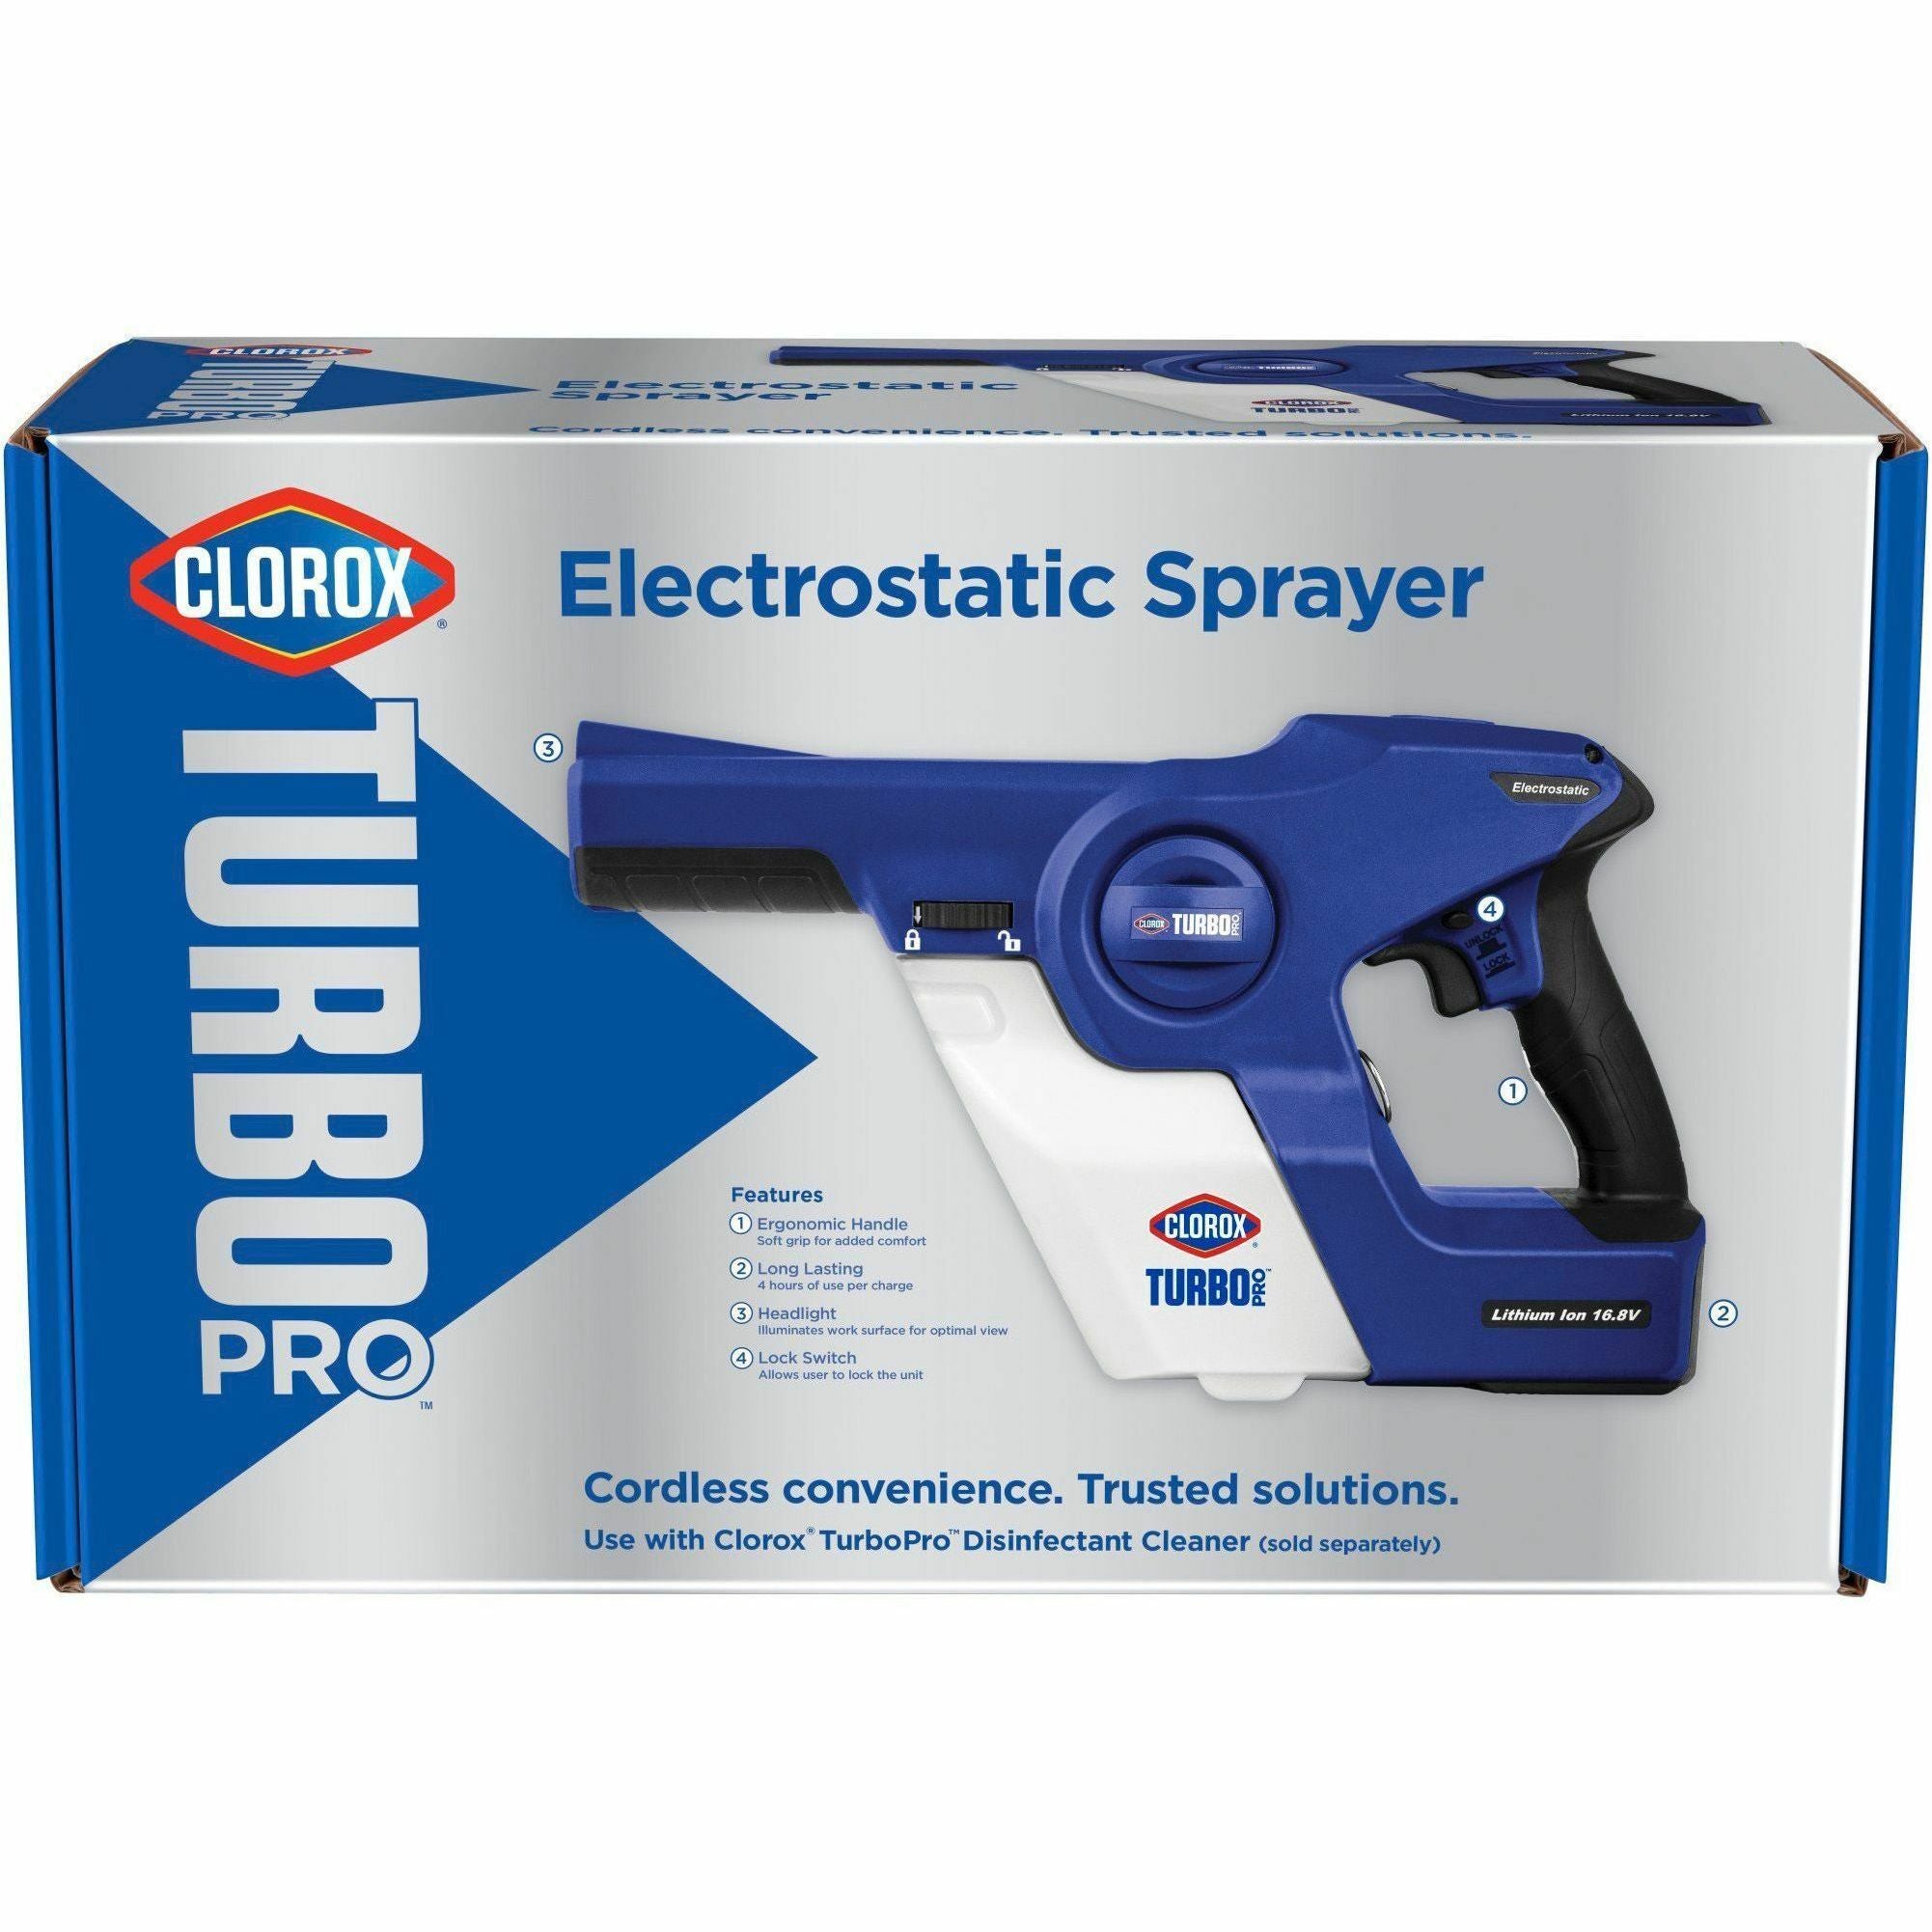 clorox-turbopro-electrostatic-sprayer-suitable-for-disinfecting-airport-hotel-laundry-room-daycare-office-gym-locker-room-electrostatic-handheld-disinfectant-lightweight-1-each-blue_clo29561 - 5